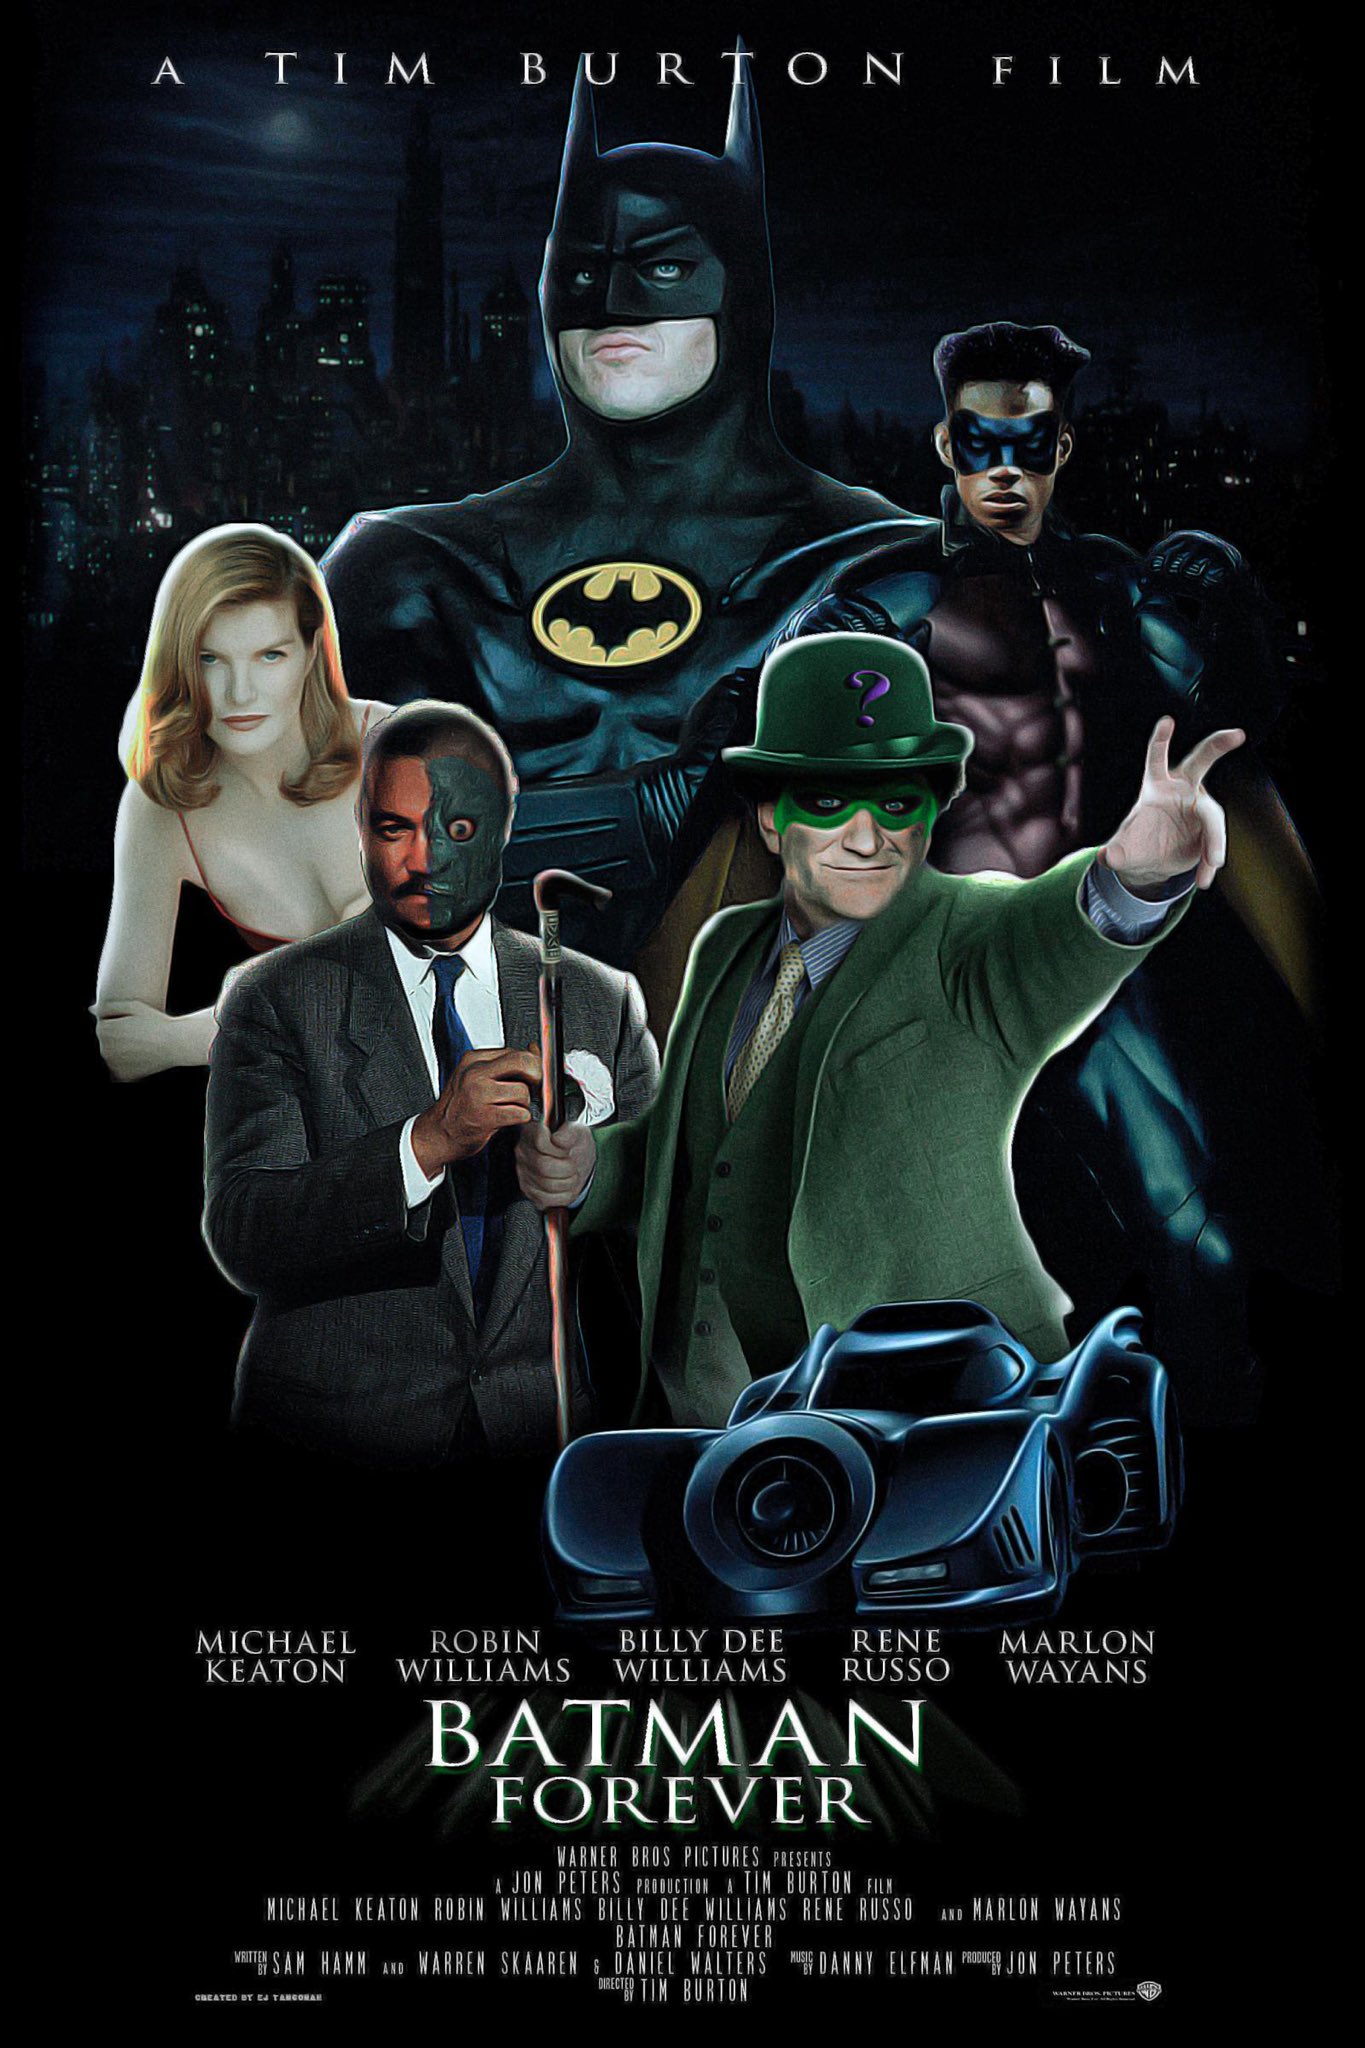 Darknight Archivist On Twitter Val Kilmer Would Be Given The Role As Batman In 1995 S Batmanforever But Other Actors Considered By The Studio To Become The New Dark Knight Included Keanu